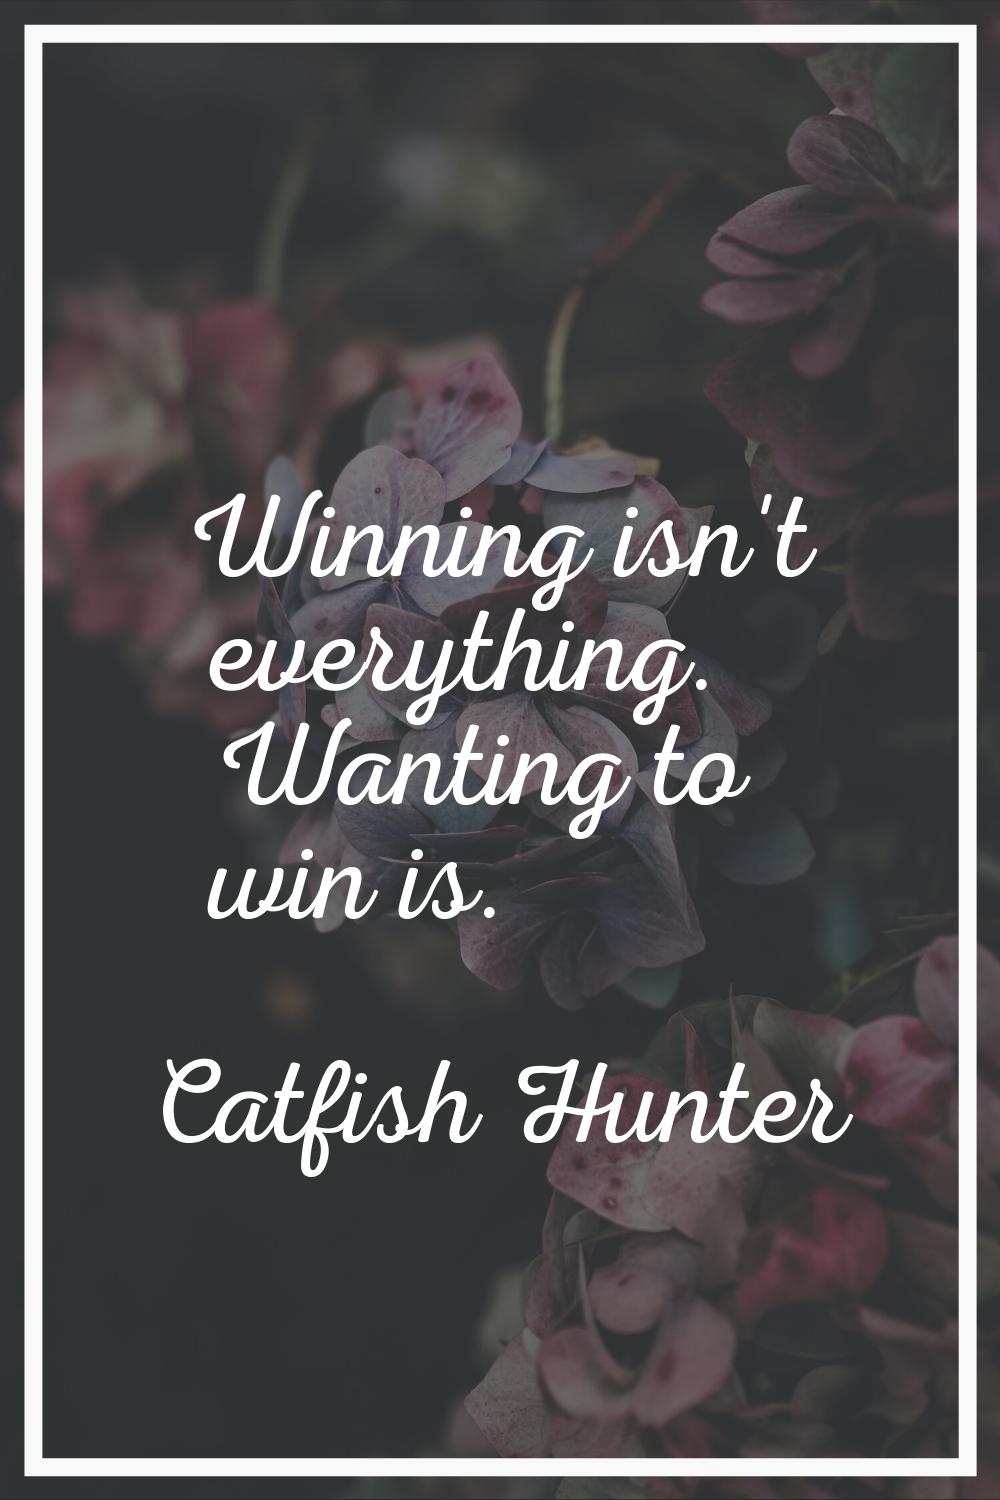 Winning isn't everything. Wanting to win is.